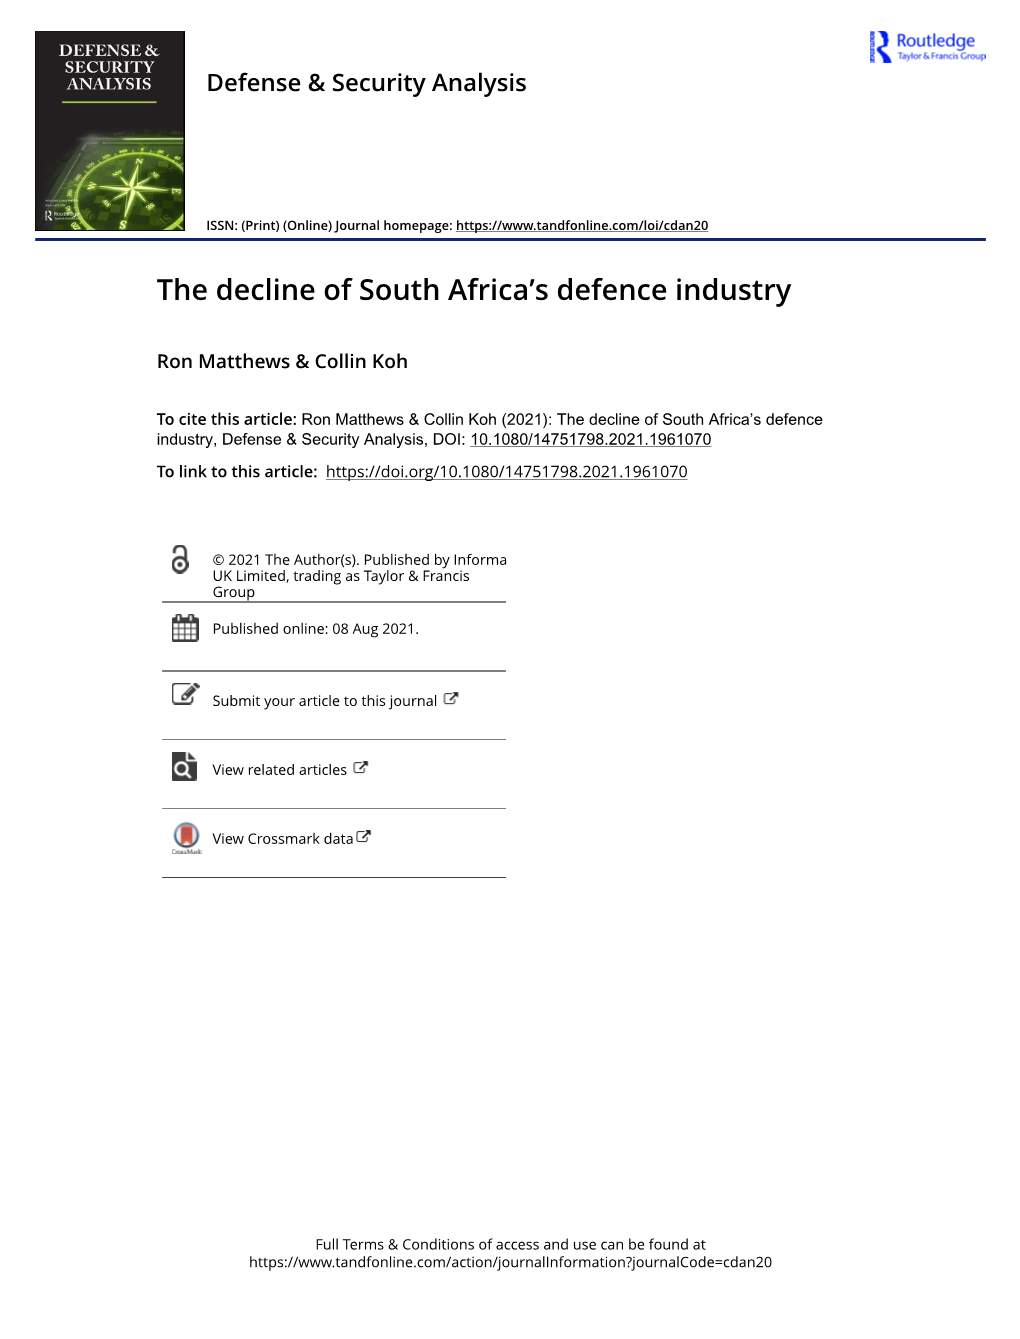 The Decline of South Africa's Defence Industry